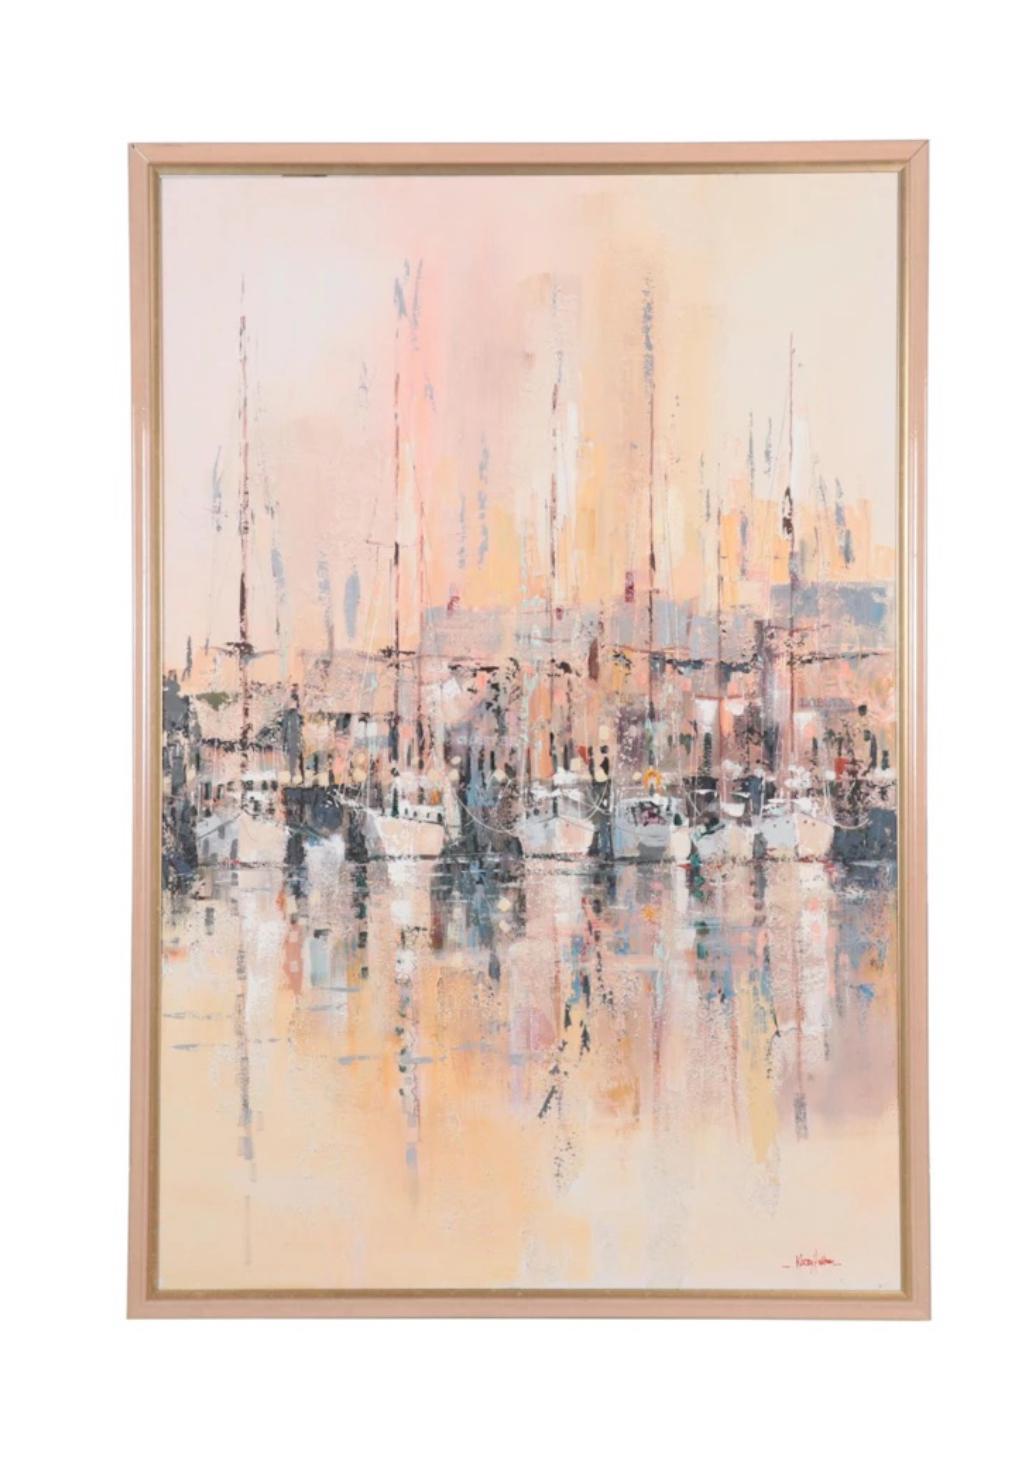 Large signed Kerry Hallam abstract harbor scene of sail boats in the distance, on the water, as the afternoon sun sets from view. A very calming painting made of oil on canvas in muted colors of peach, pink, blue and tan. Framed artwork measures